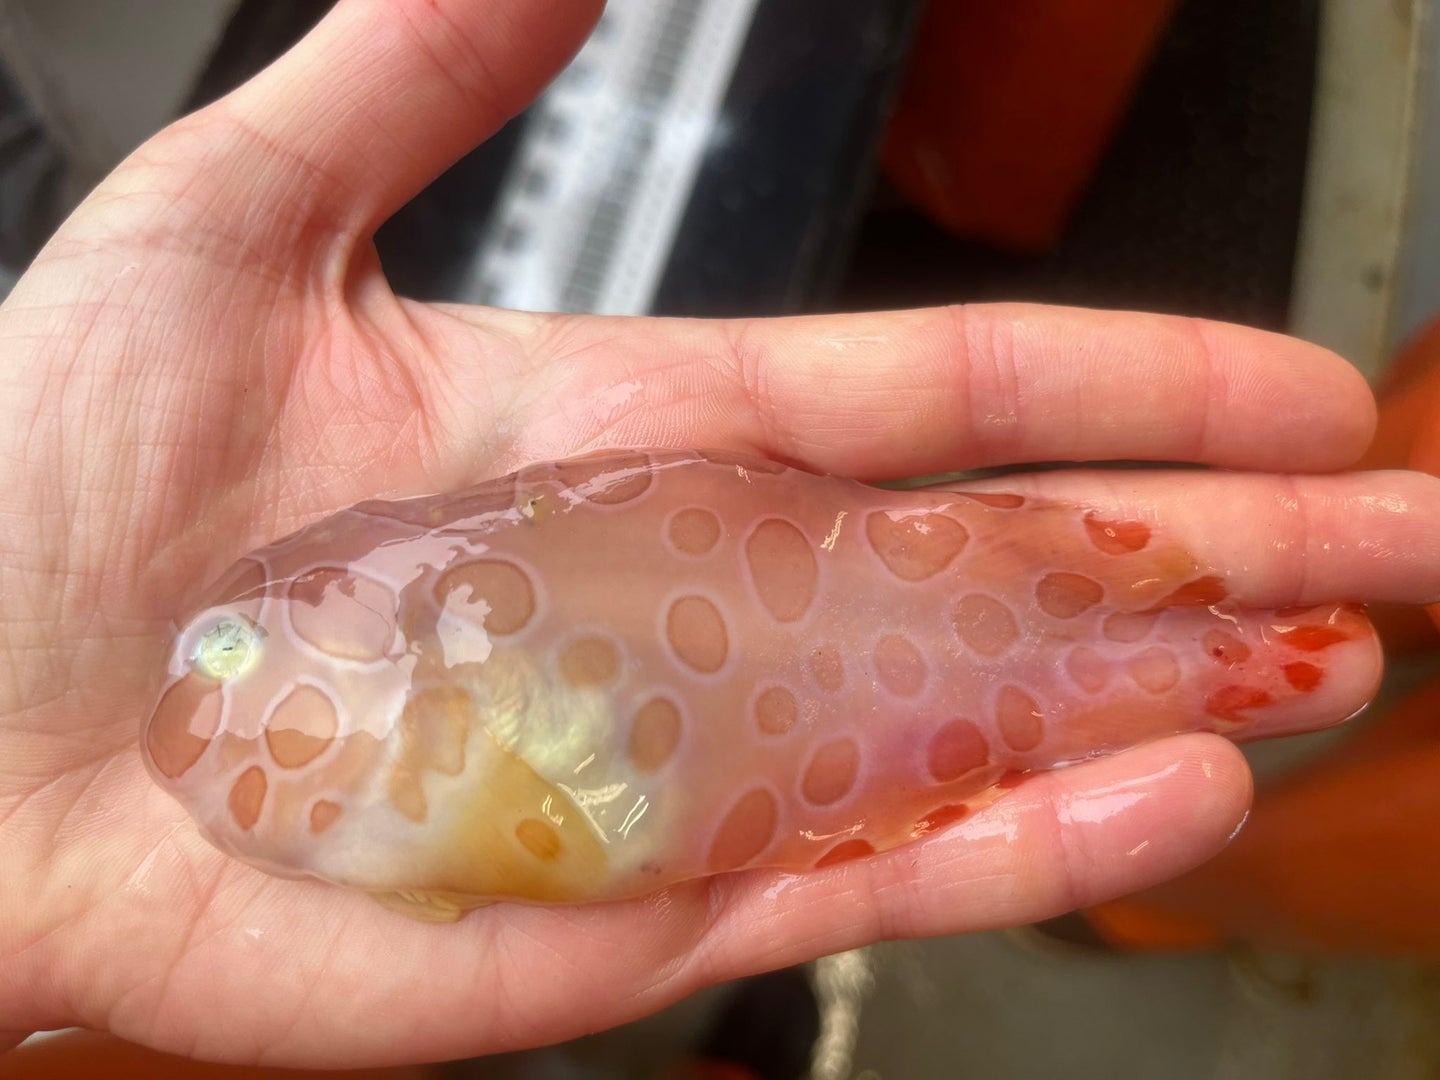 small translucent fish in someone's hand